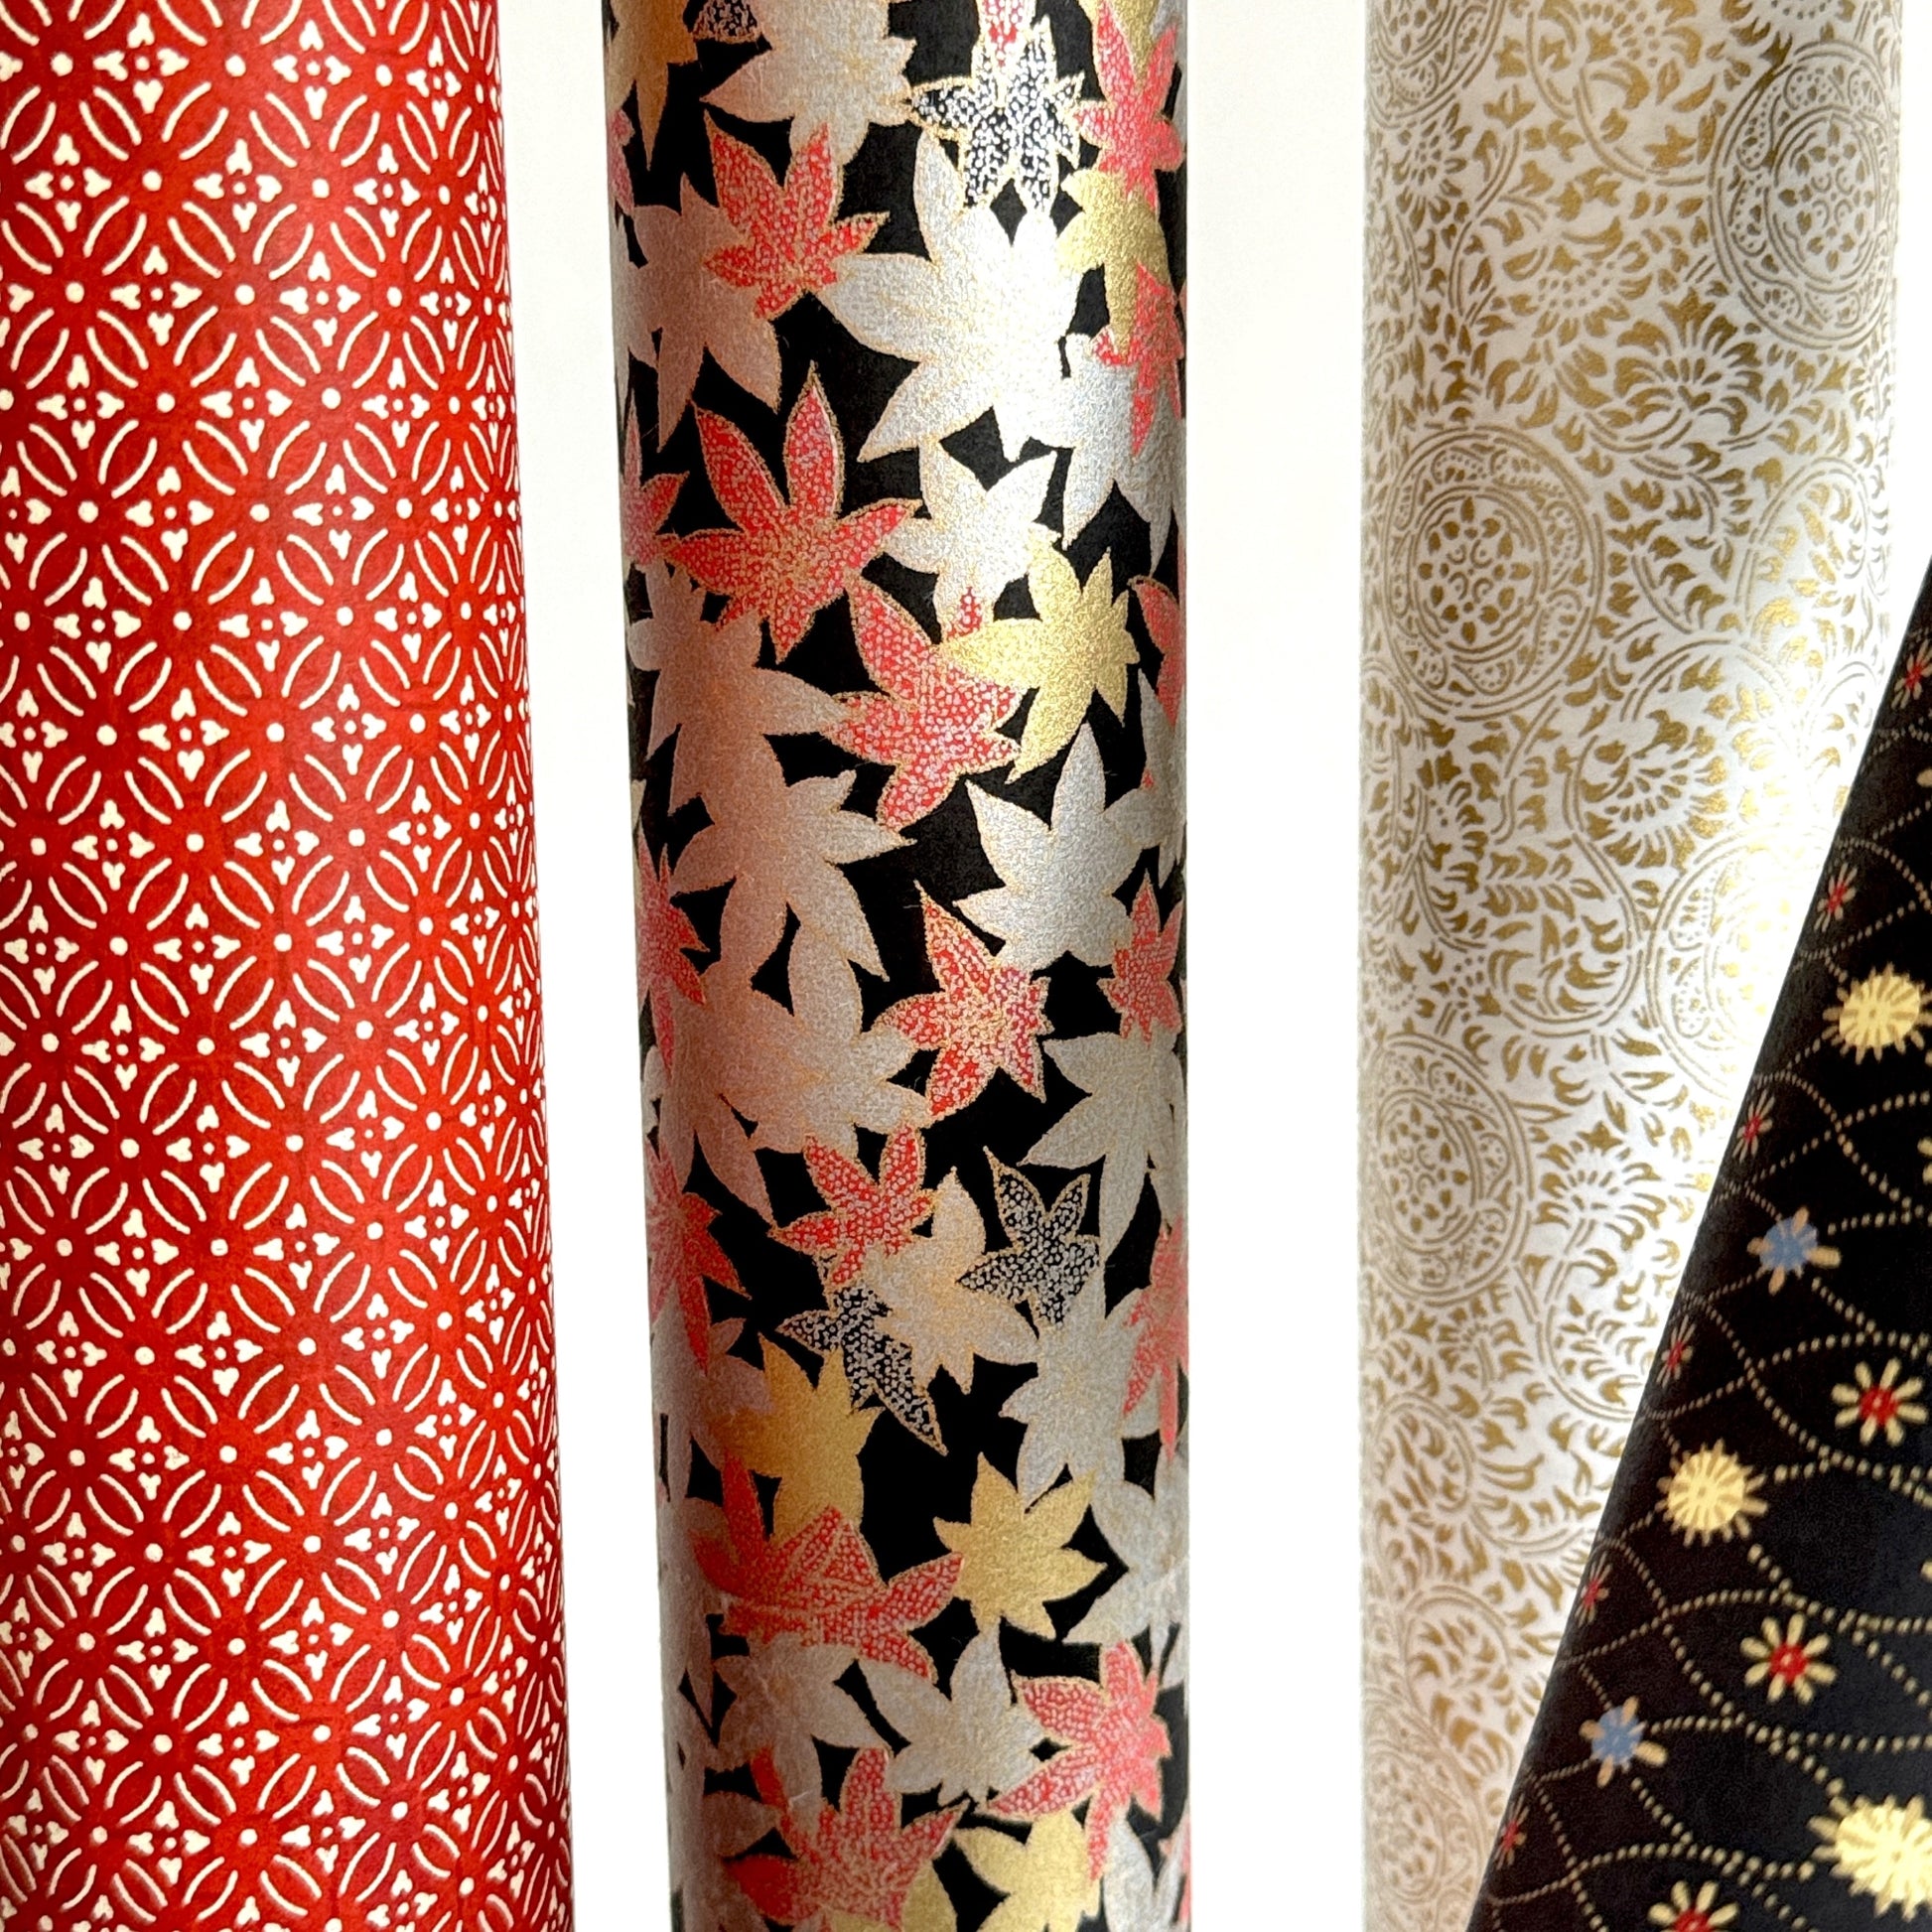 Japanese silkscreen chiyogami paper with an abundance of falling maple leaves in red, gold and silver on black backdrop, rolled alongside other patterns.